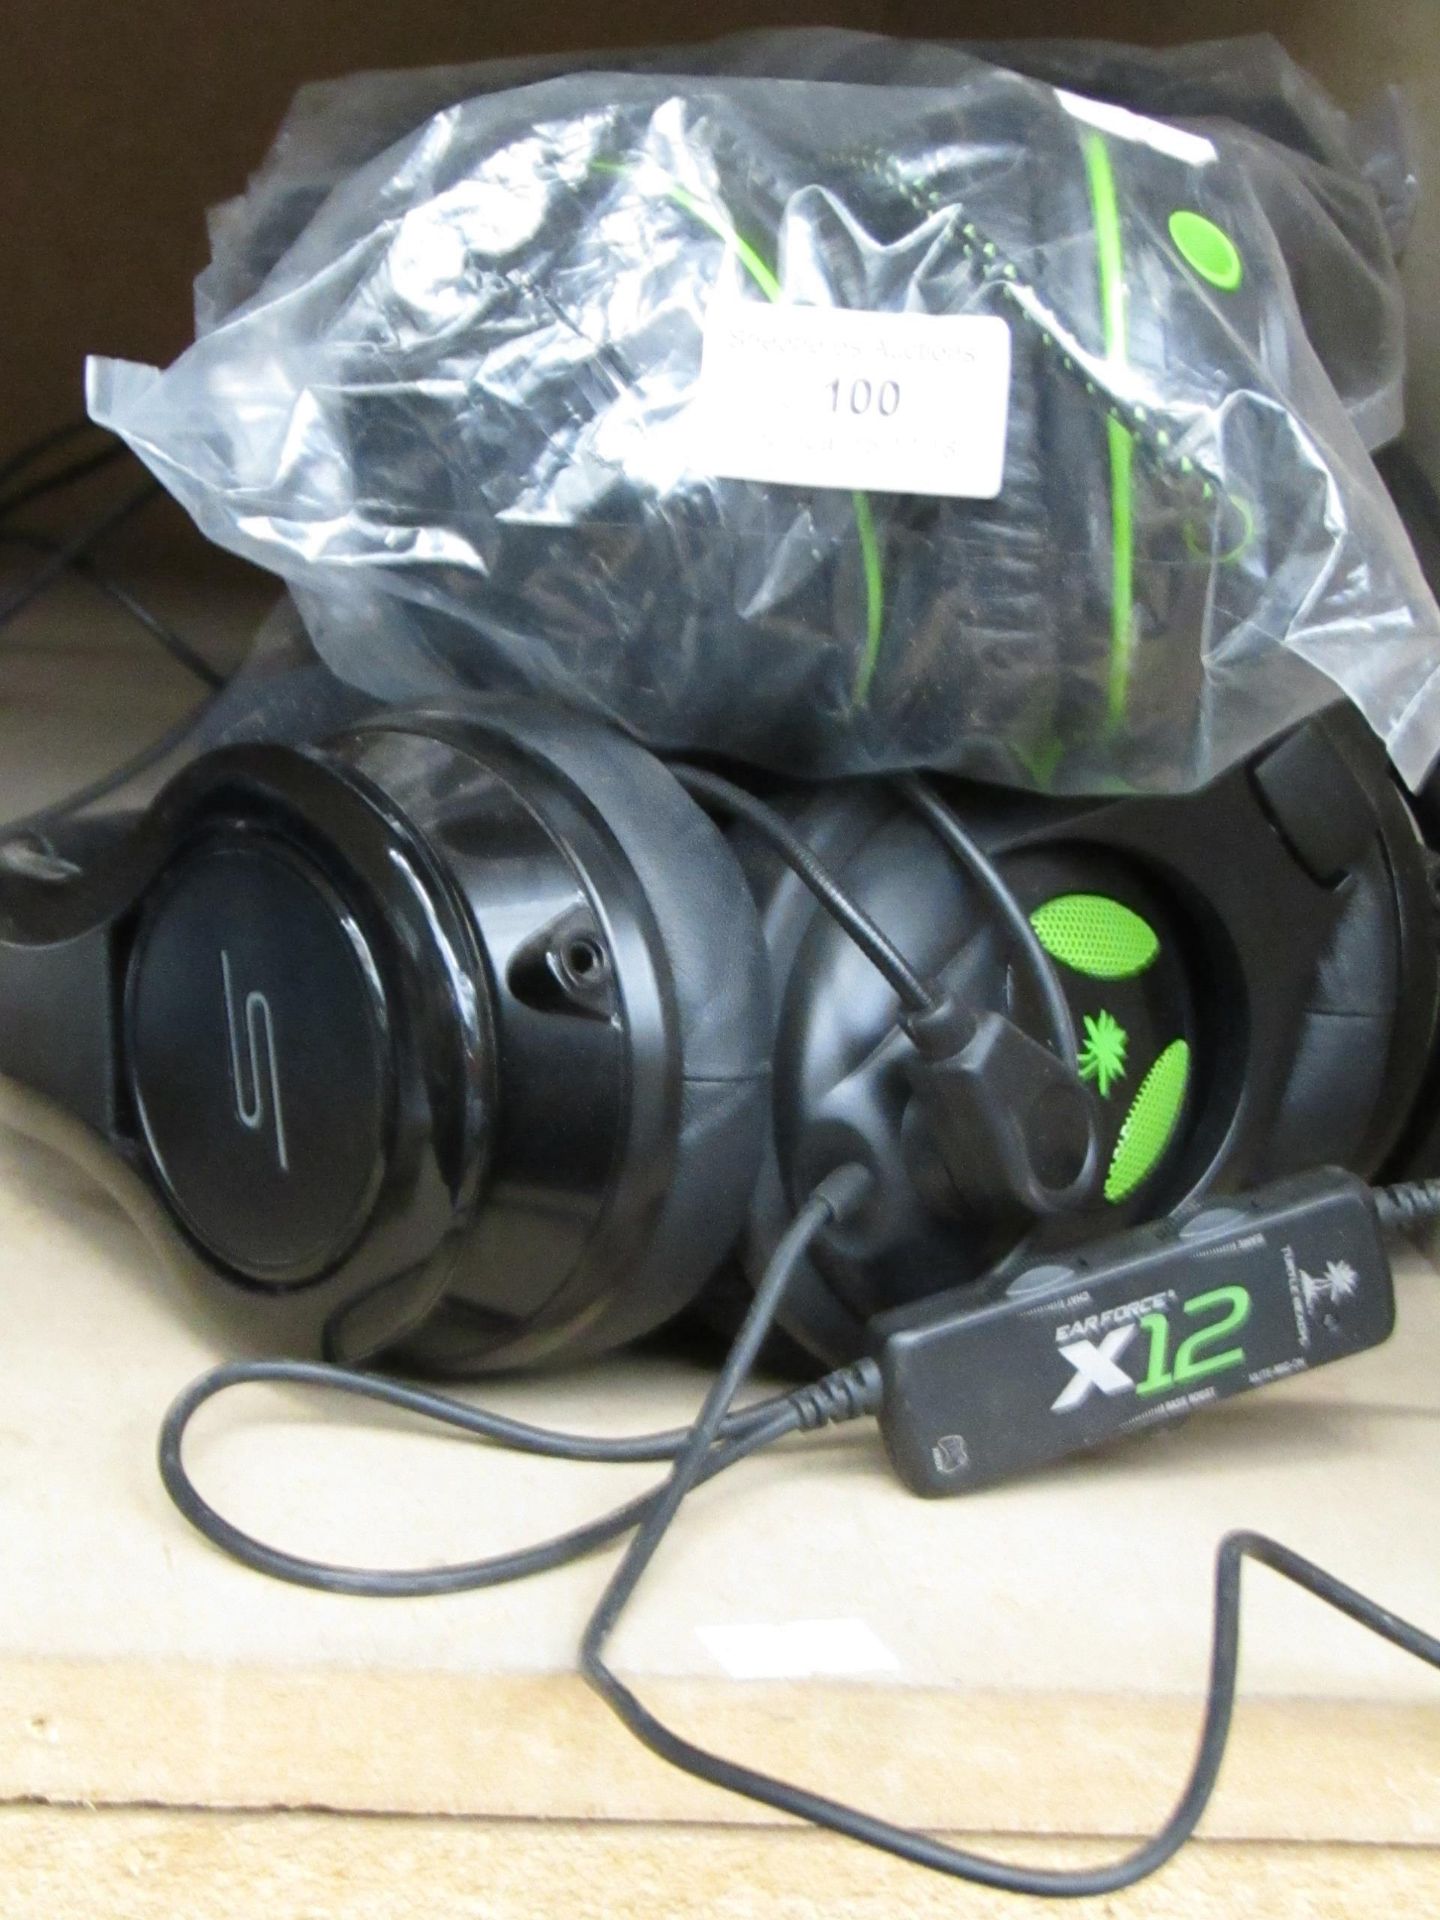 3x Turtle Beach headsets, all untested.